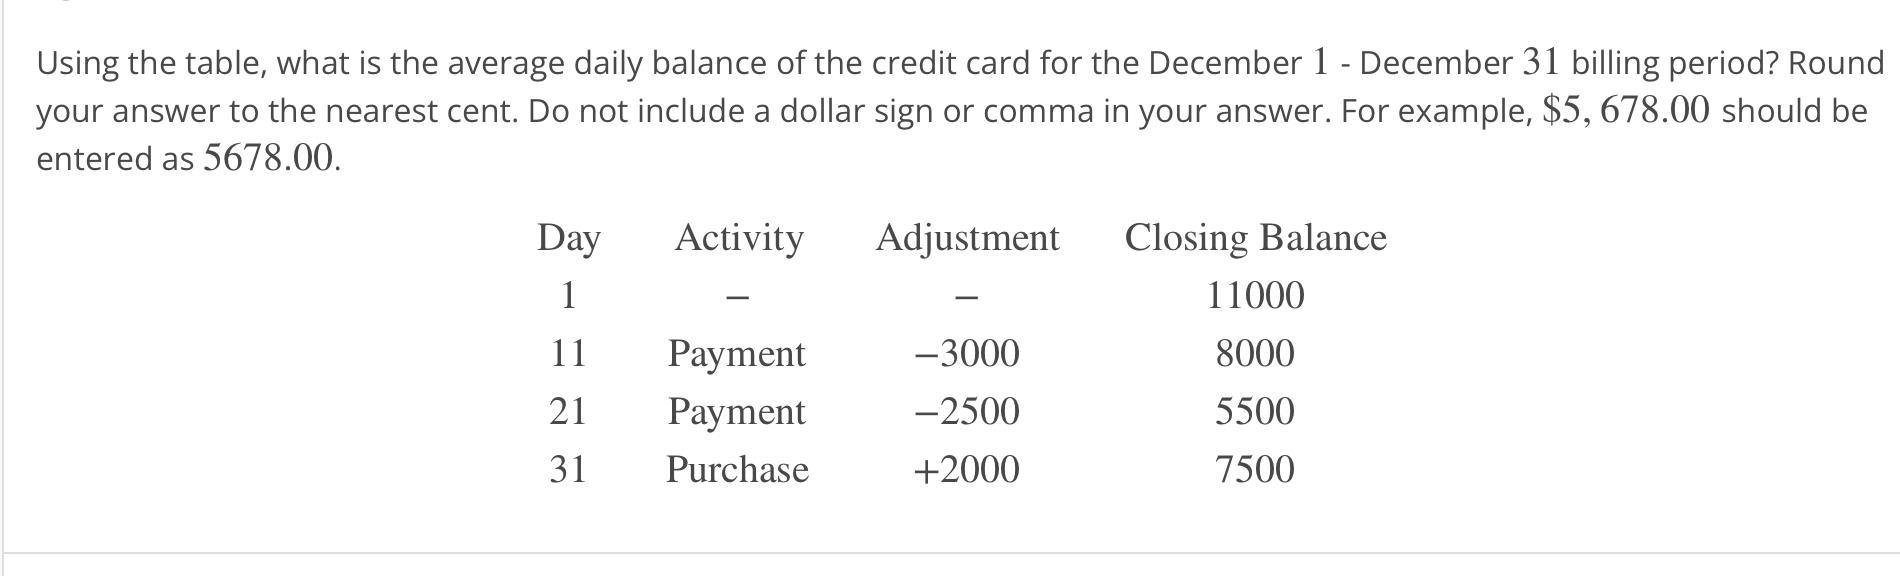 Using The Table, What Is The Average Daily Balance Of The Credit Card For The December 1 - December 31